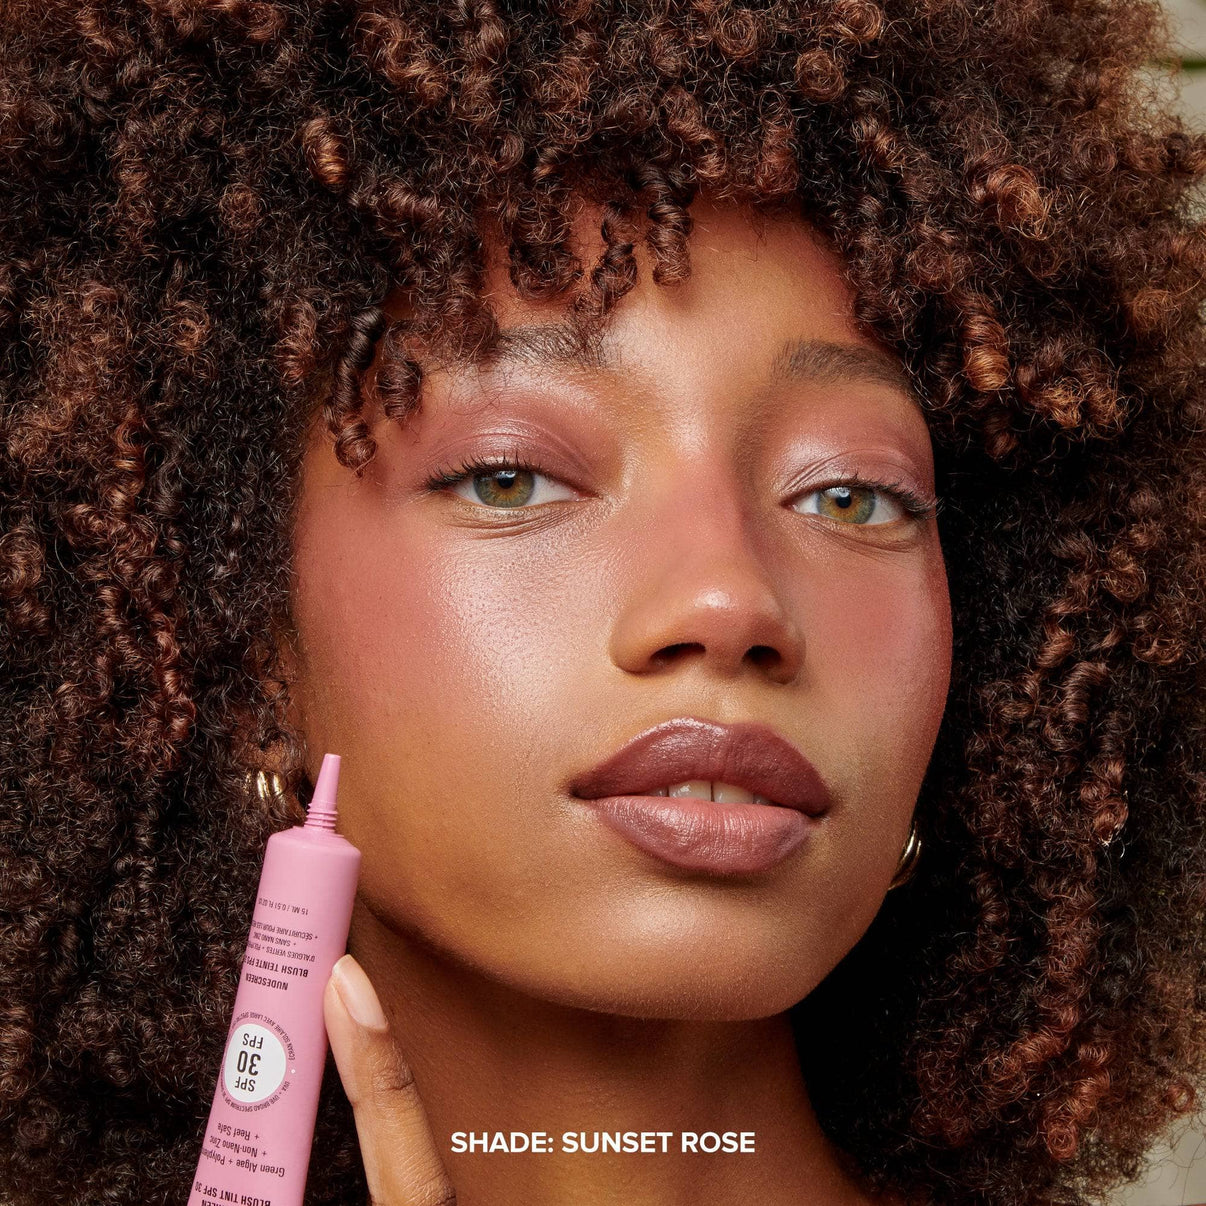 Dark skinned young woman applying Nudescreen Blush Tint Sunset Rose on her cheeks - 11